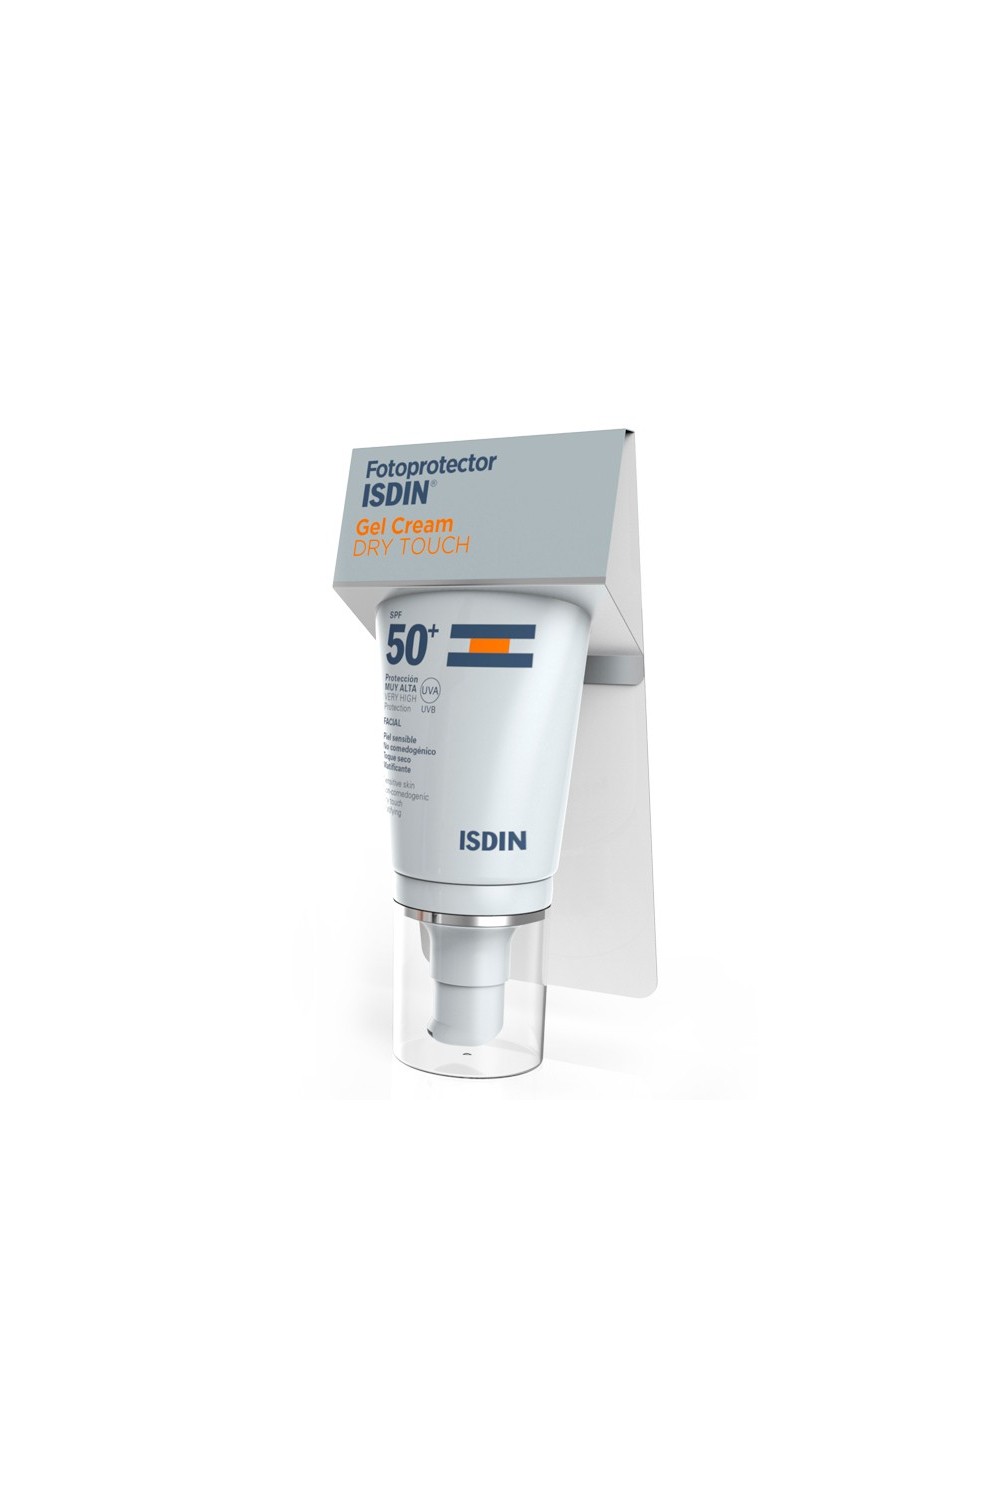 Isdin Fotoprotector Gel Cream Dry Touch Spf50+ 50ml